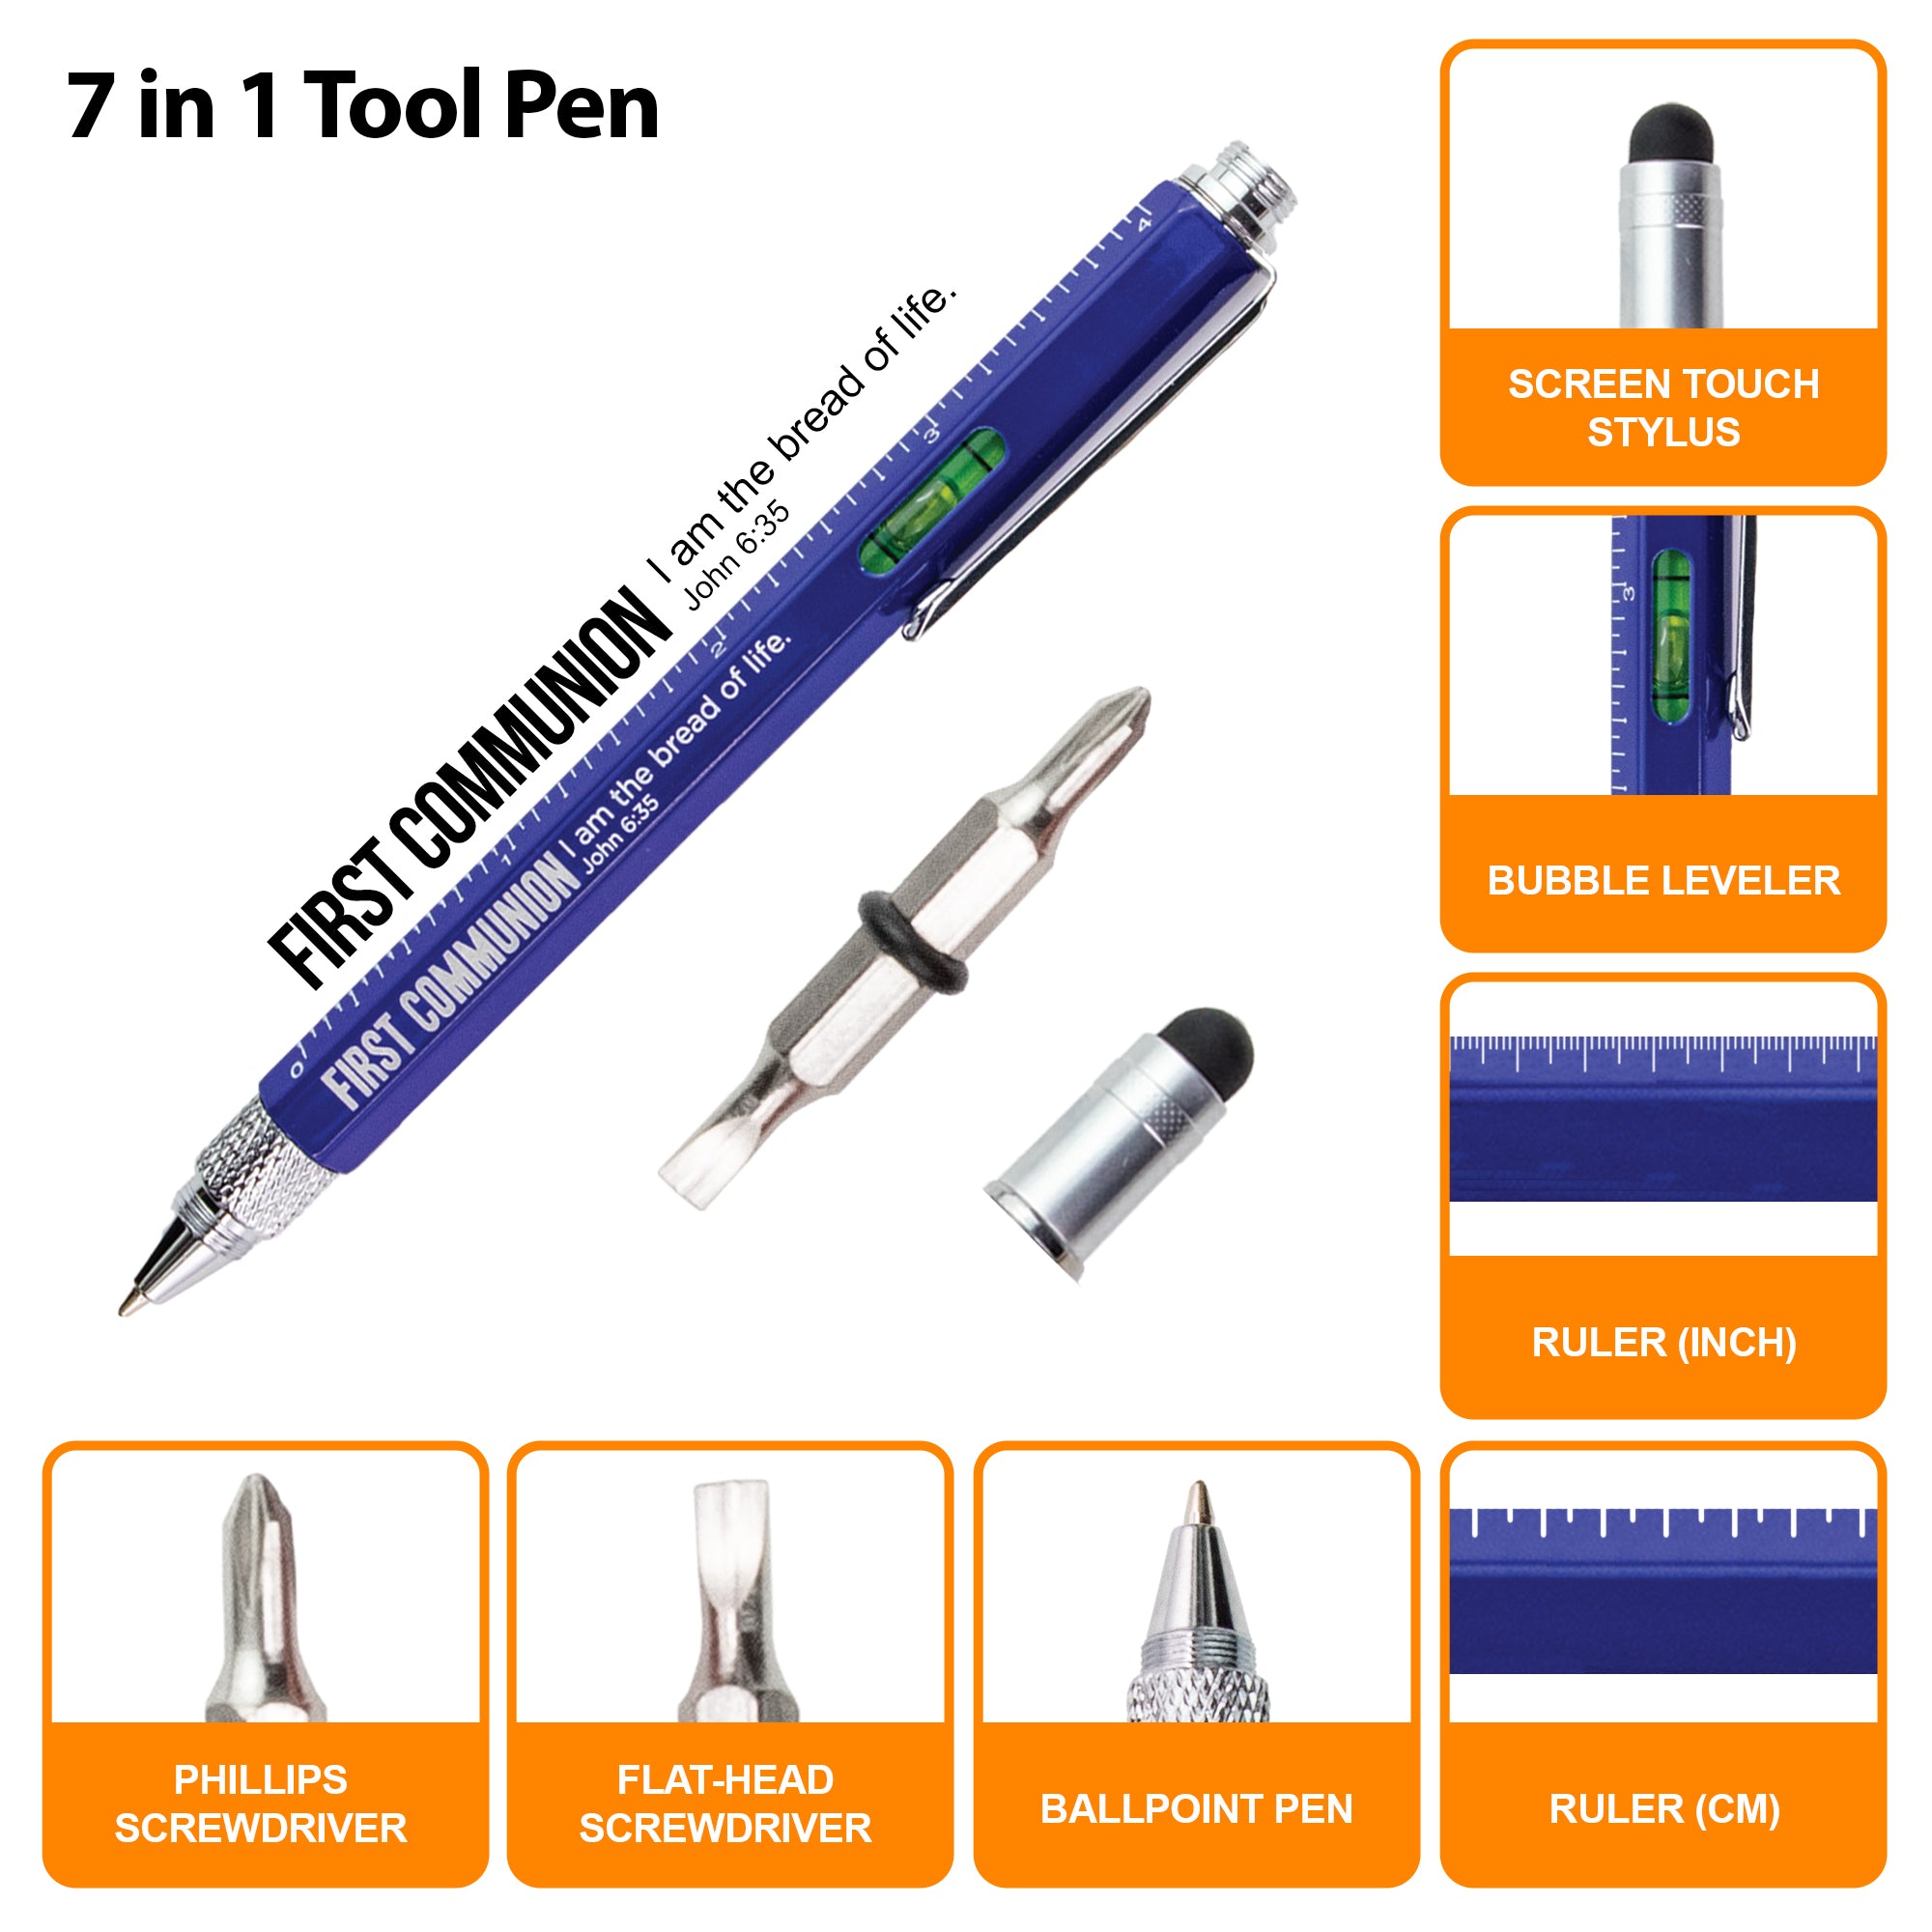 7 in 1 Multitool Pen With Scripture - First Communion: John 6:35